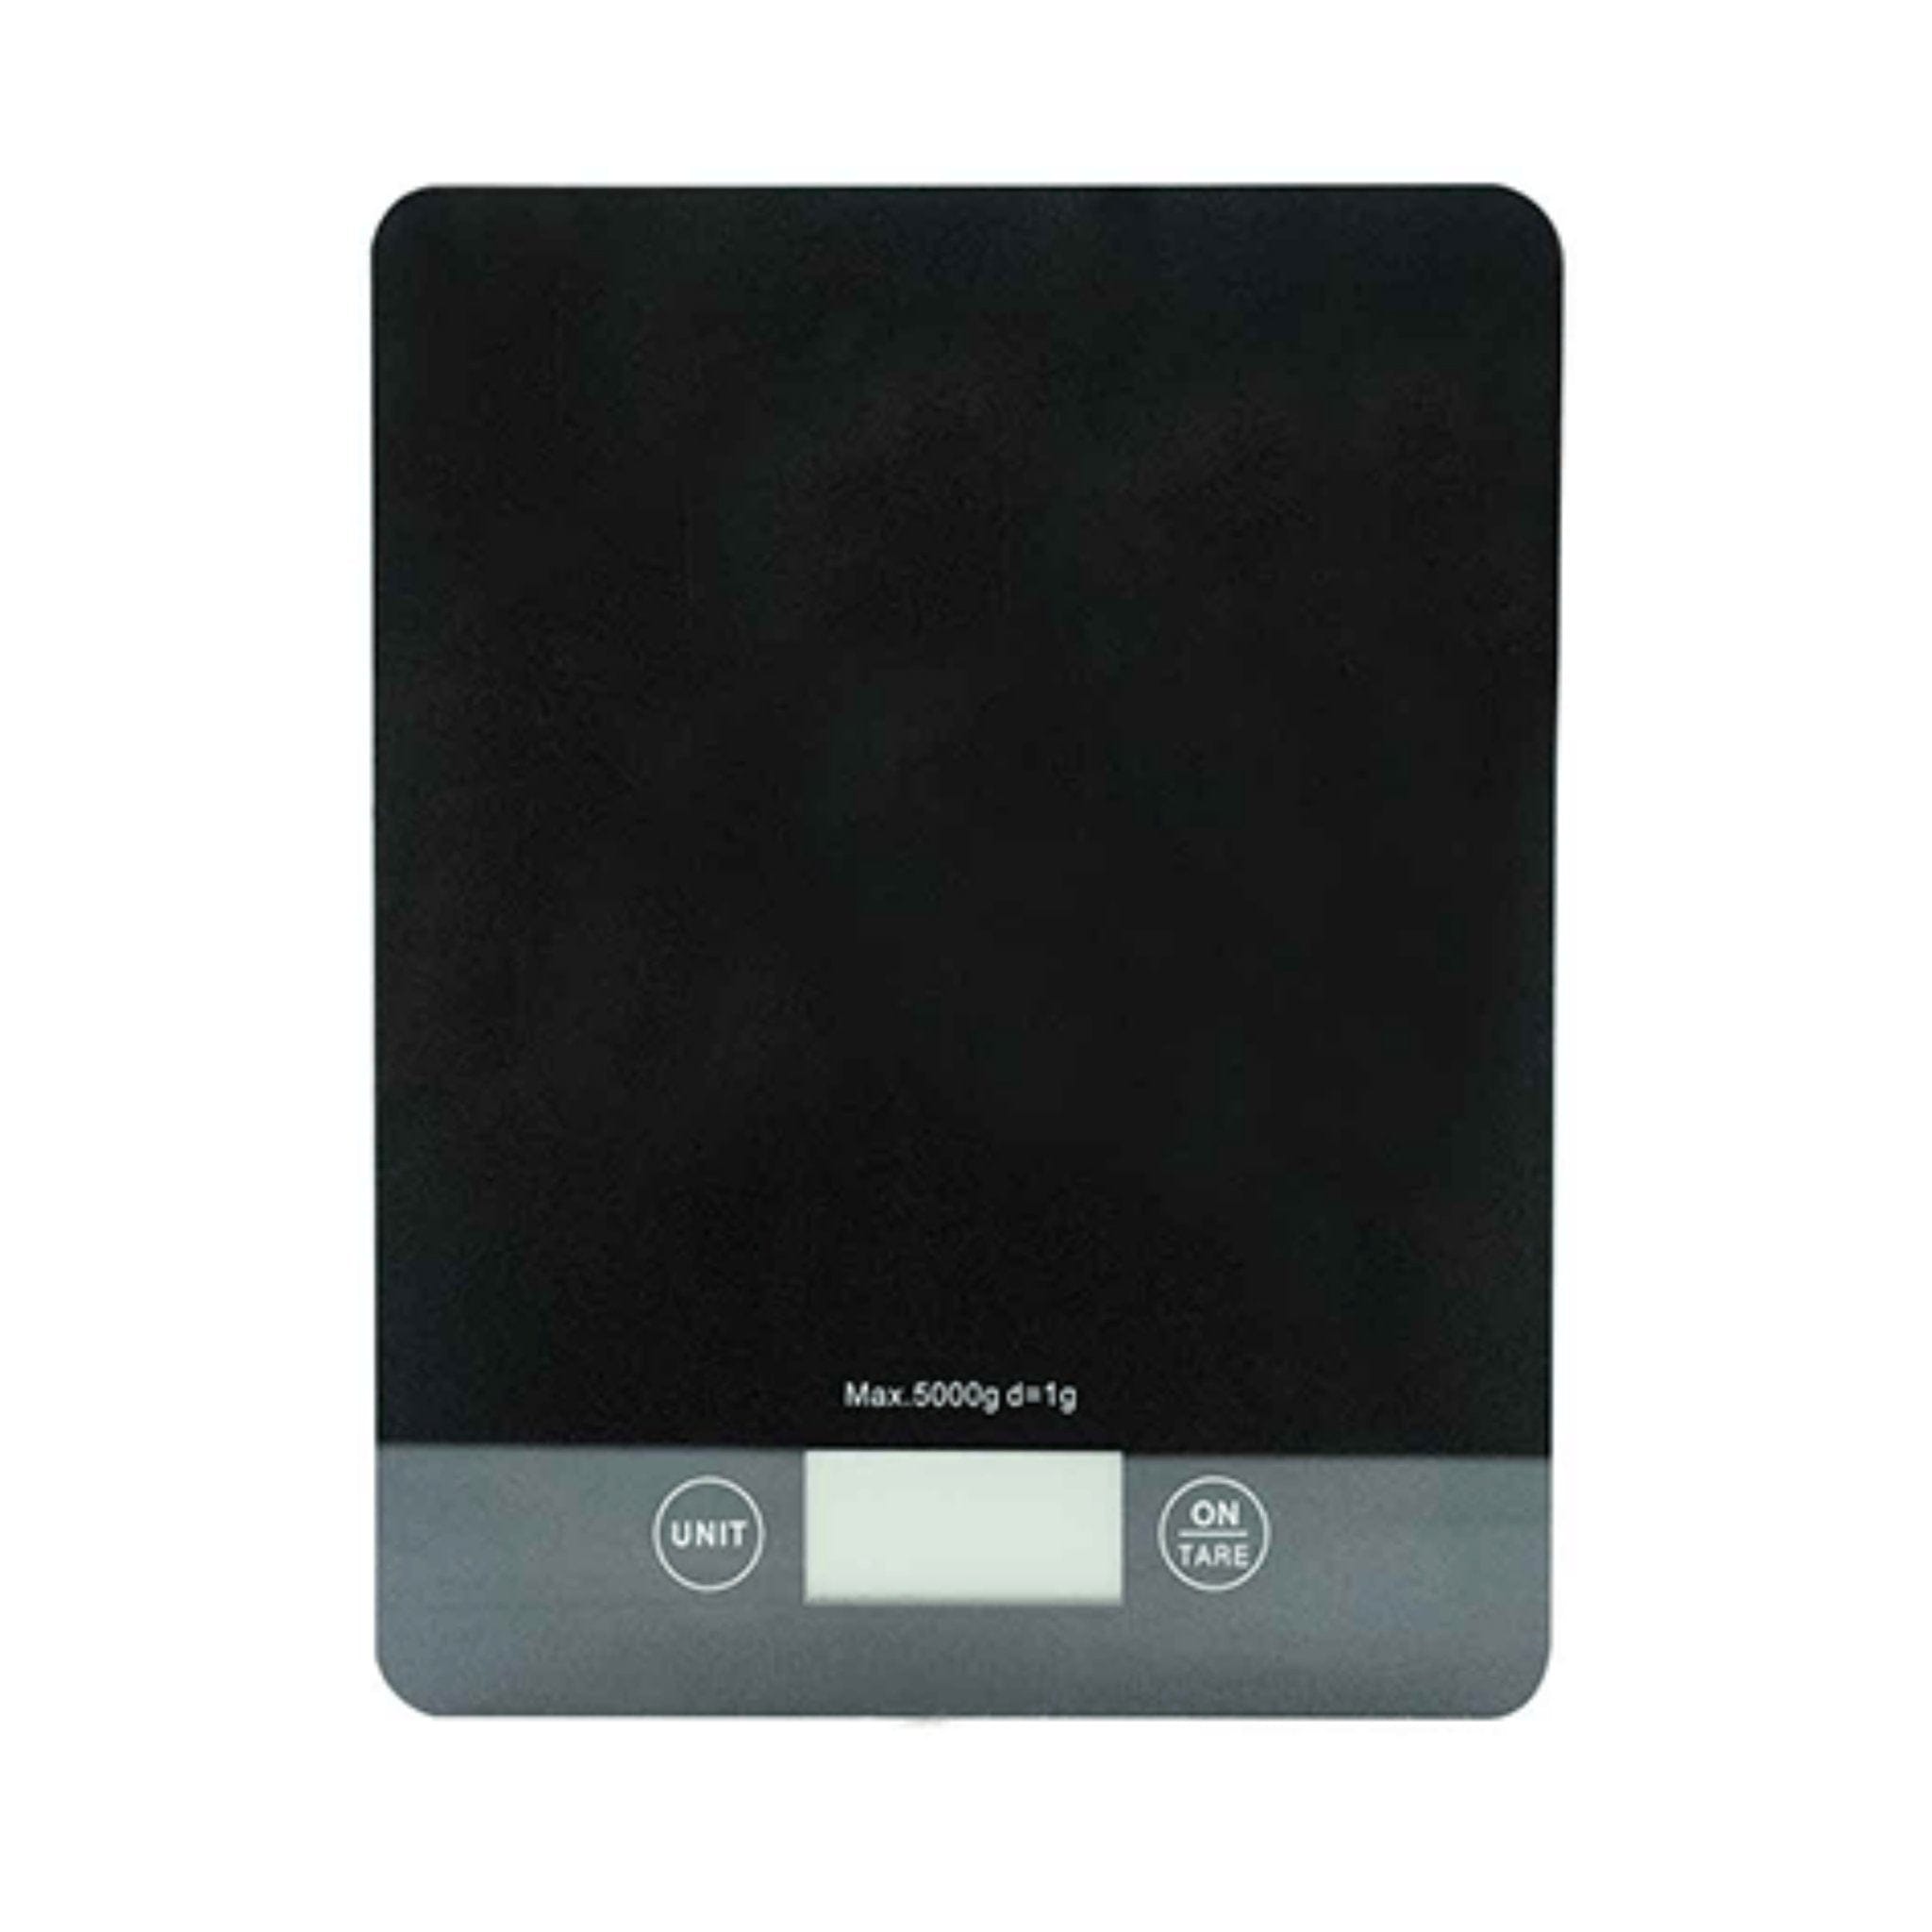 Digital Scales Black, Red and Silver - HairBeautyInk